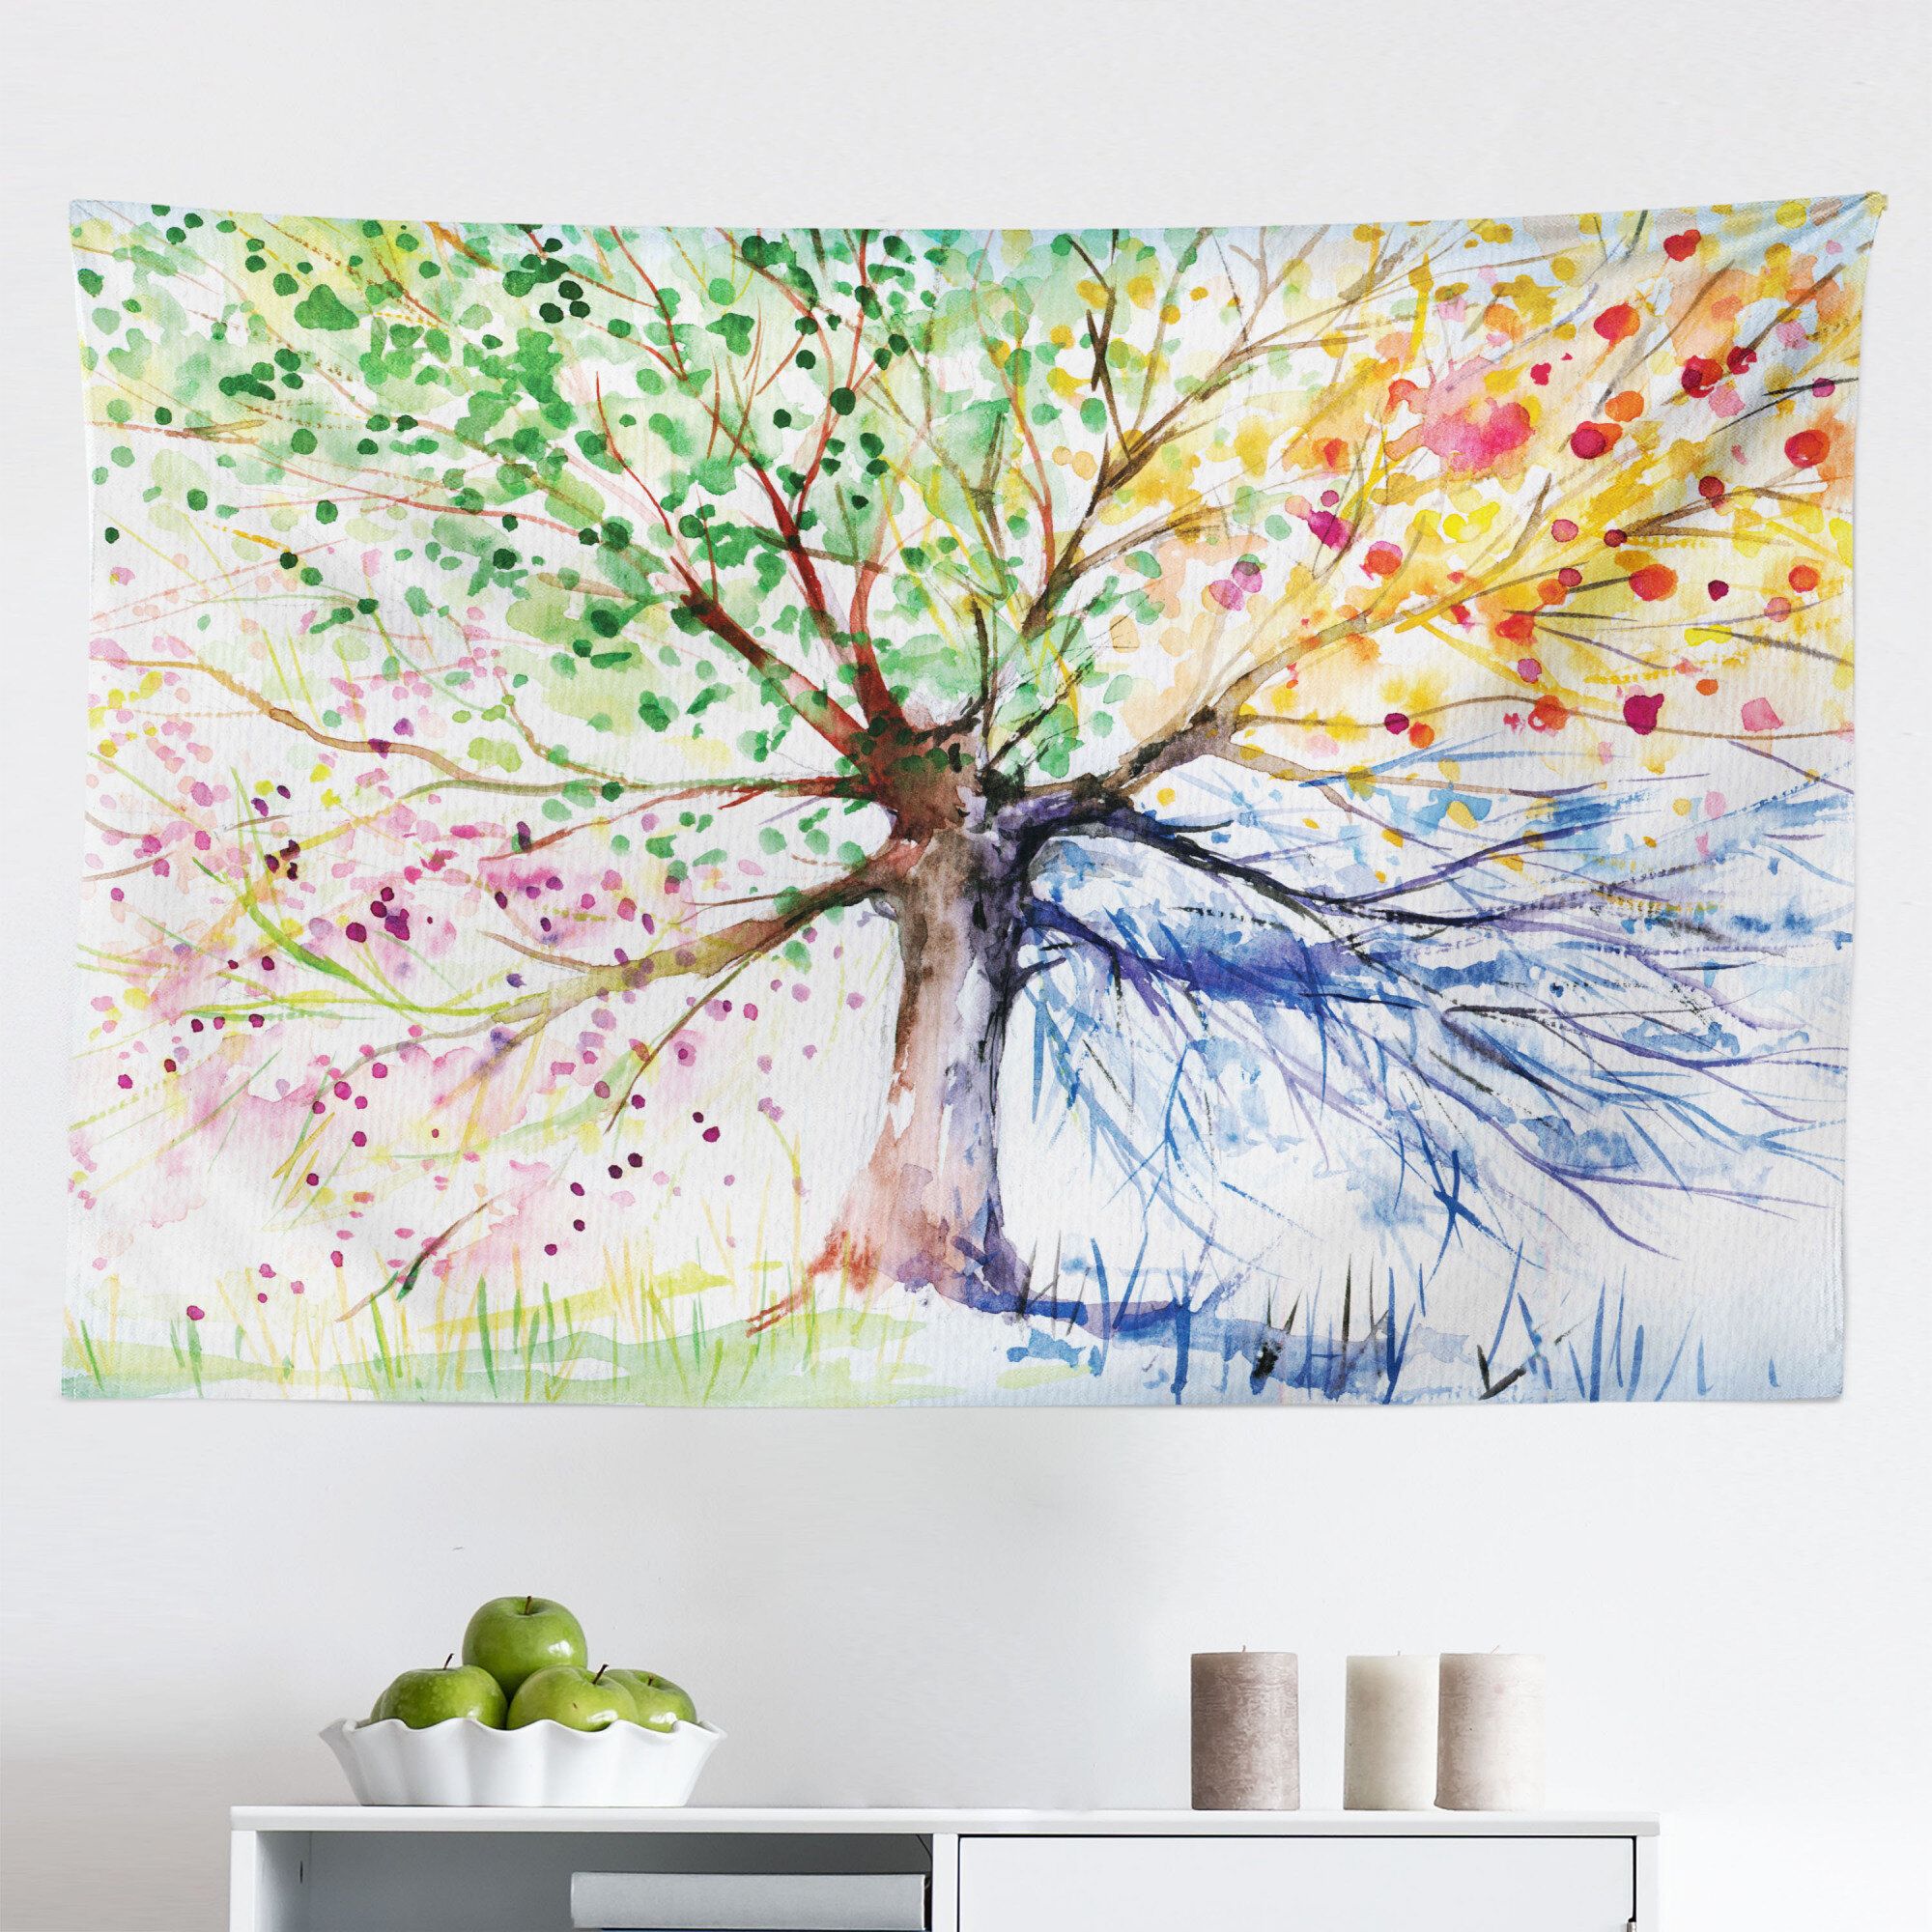 East Urban Home Tree Tapestry, Watercolor Nature Colorful Blooming Branches  4 Seasons Themed Illustration Print, Fabric Wall Hanging Decor For Bedroom  Living Room Dorm, 45" X 30", Multicolor | Wayfair In Colorful Branching Wall Art (View 11 of 15)